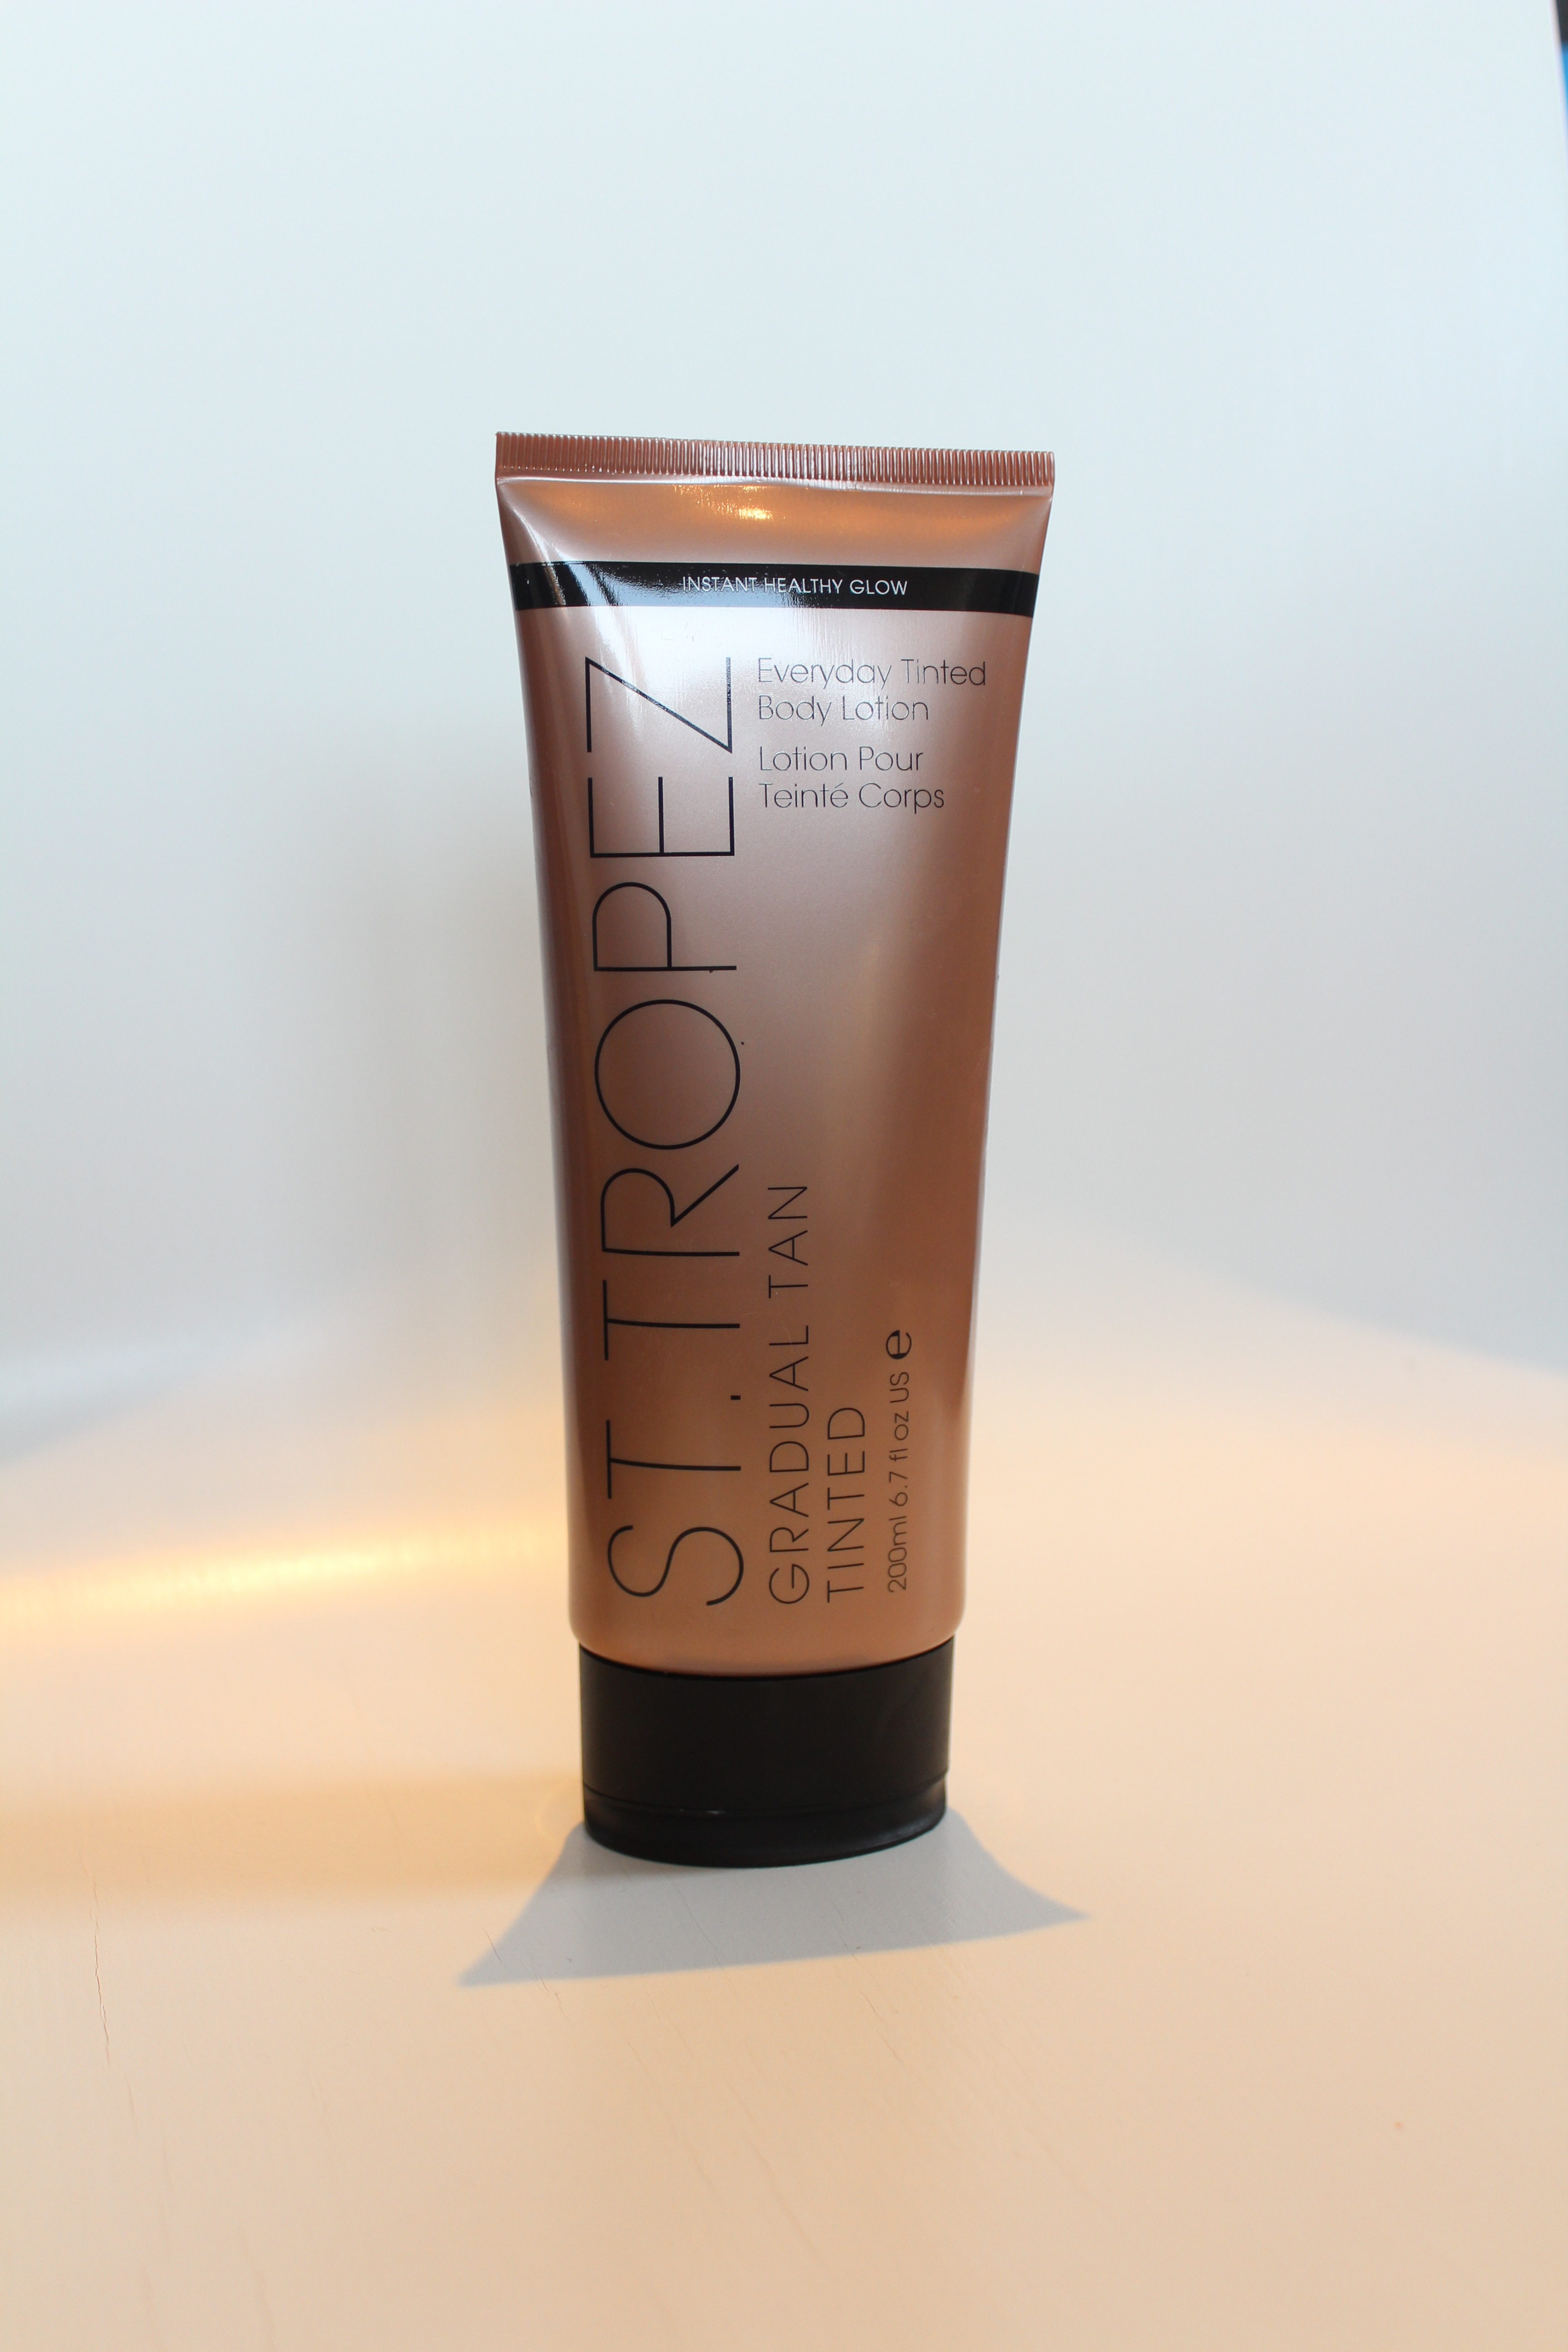 St Tropez Gradual Tan Tinted Everyday Body Lotion Review by Face Made Up